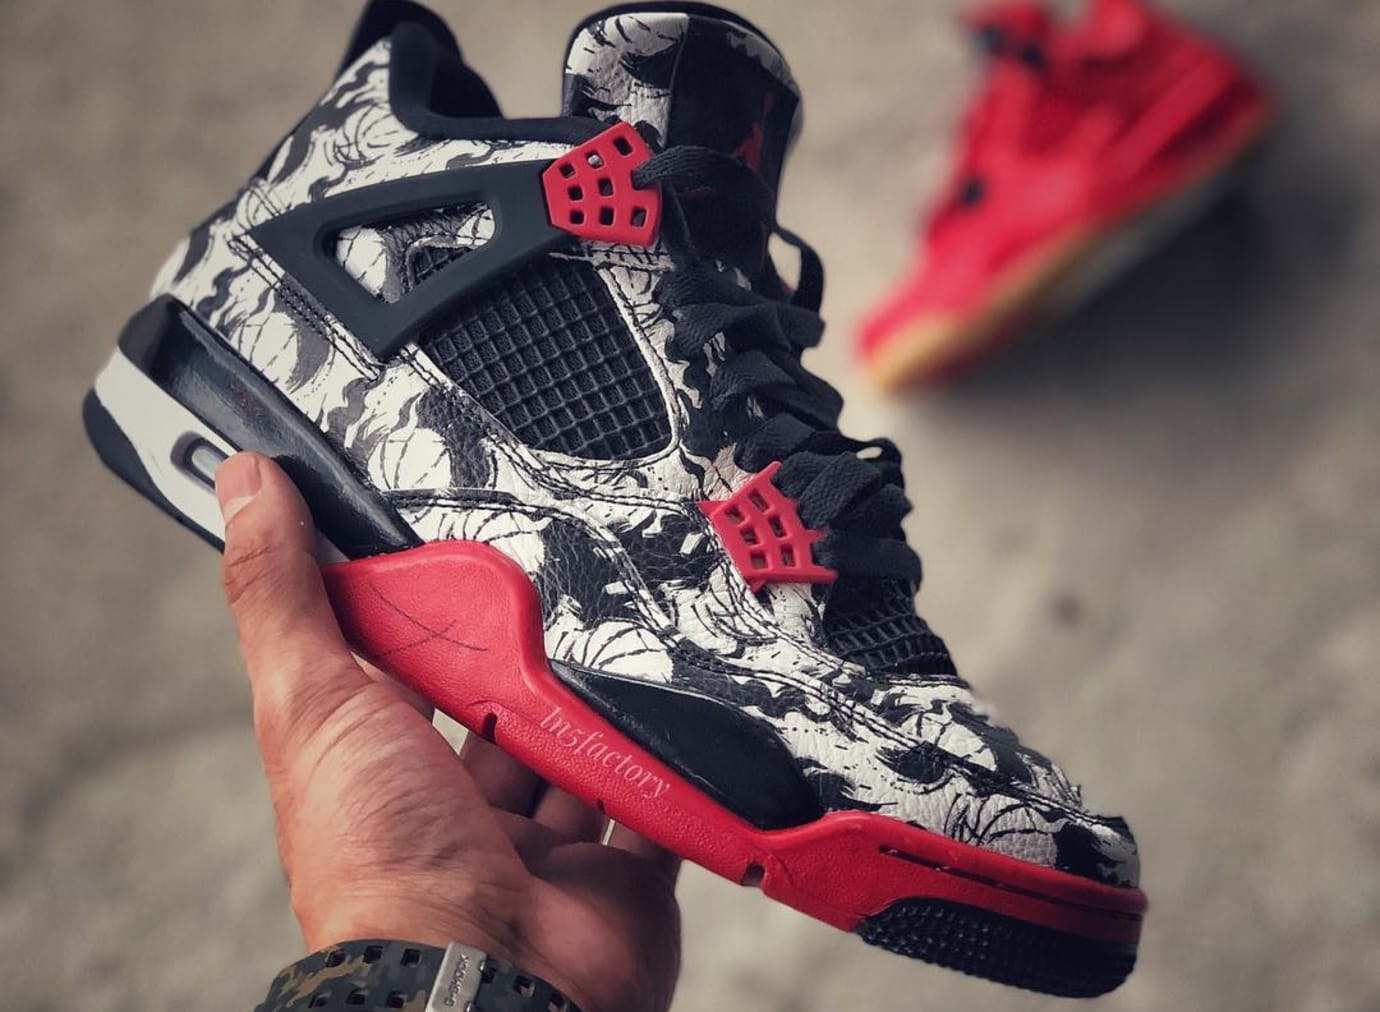 Air Jordan 4 Graphic Print Early Look | Sole Collector